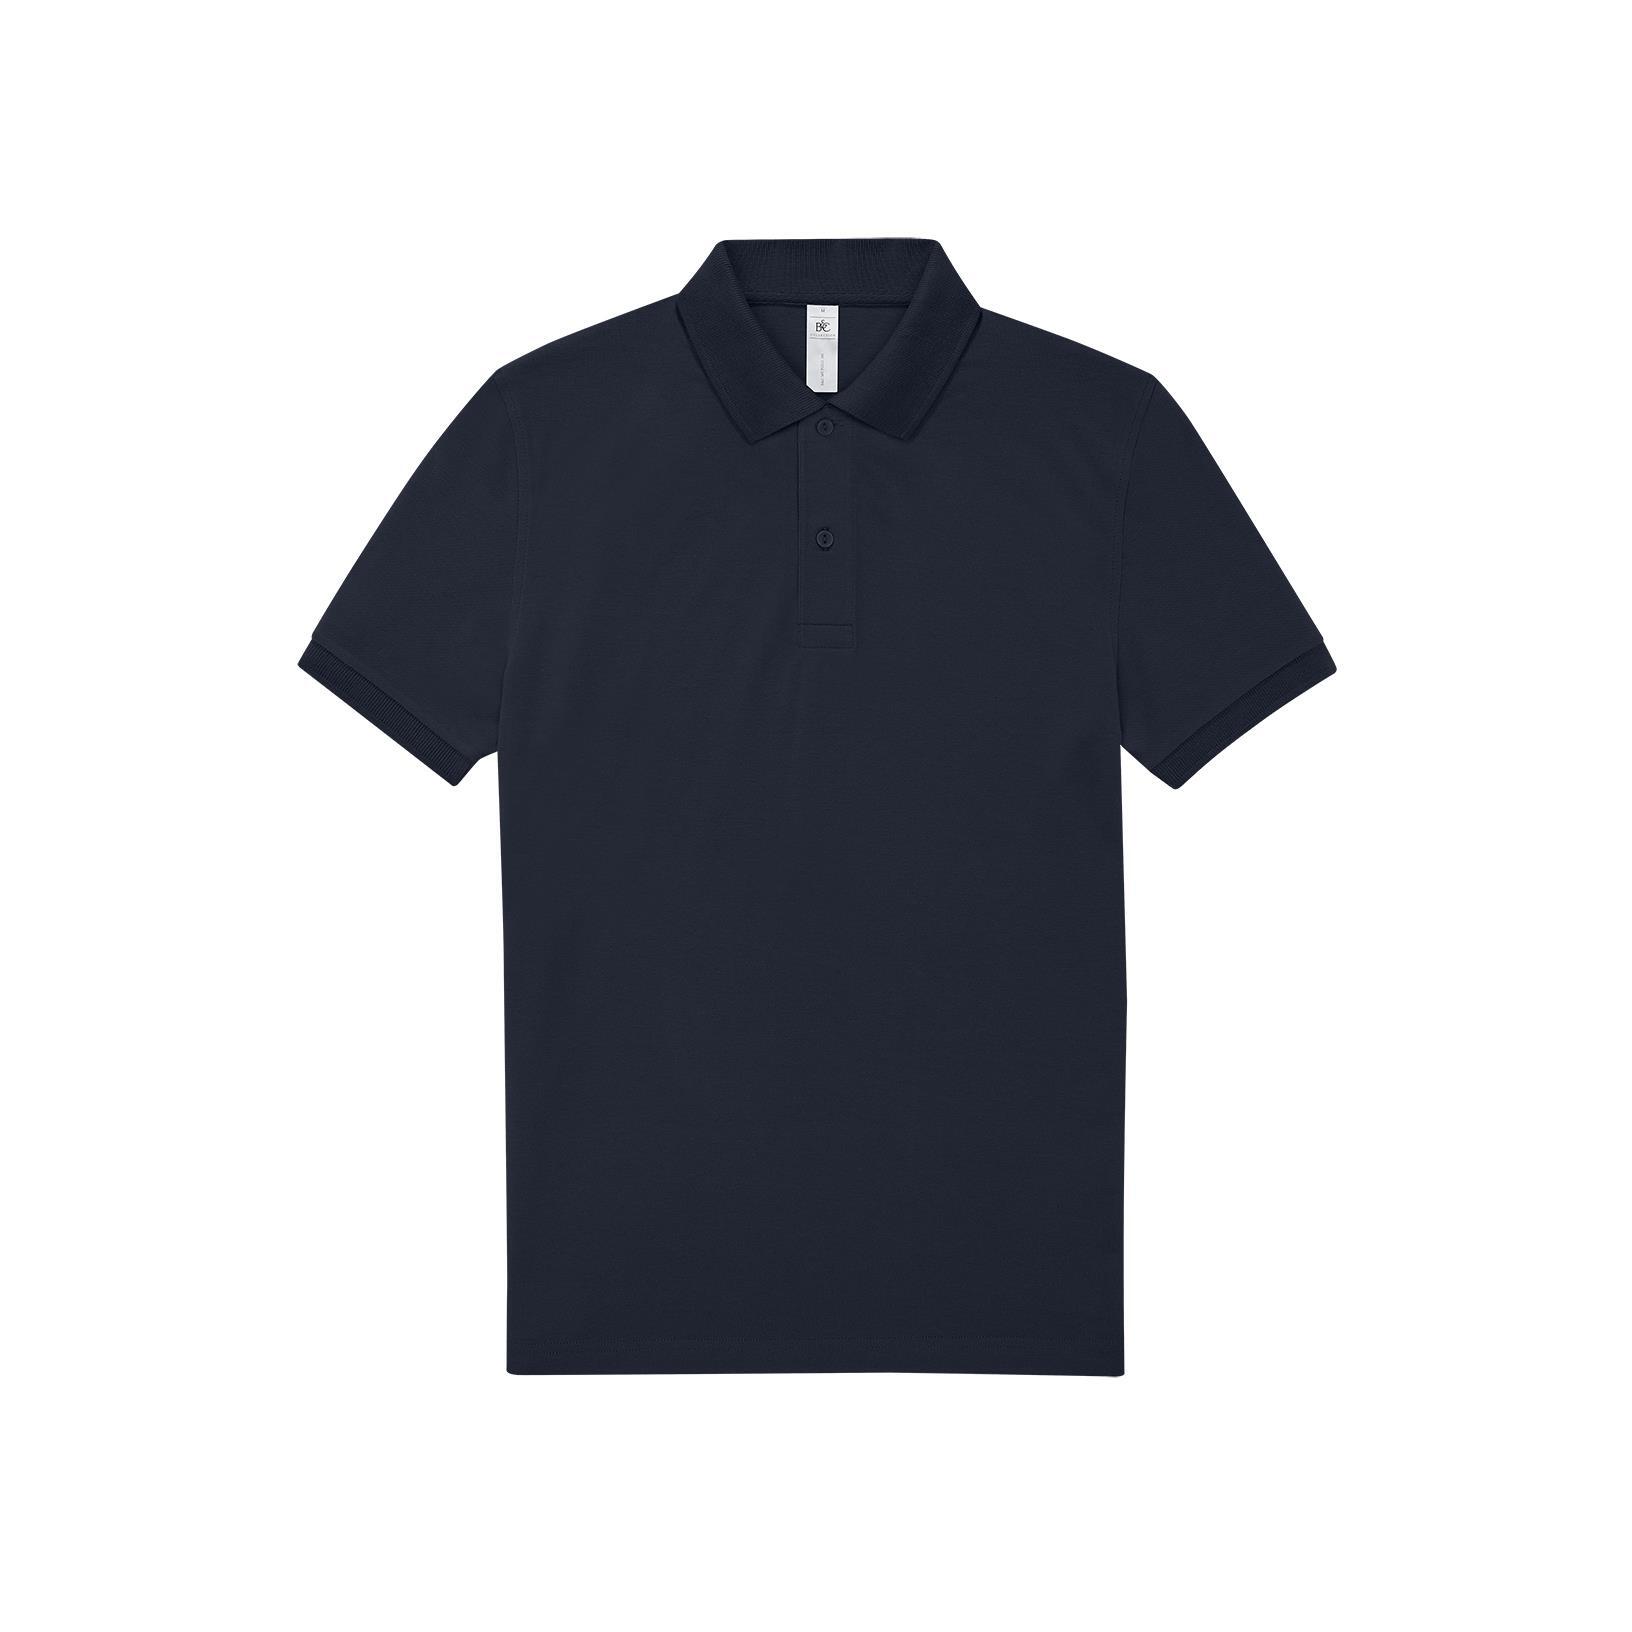 Polo voor mannen navy pure moderne polo